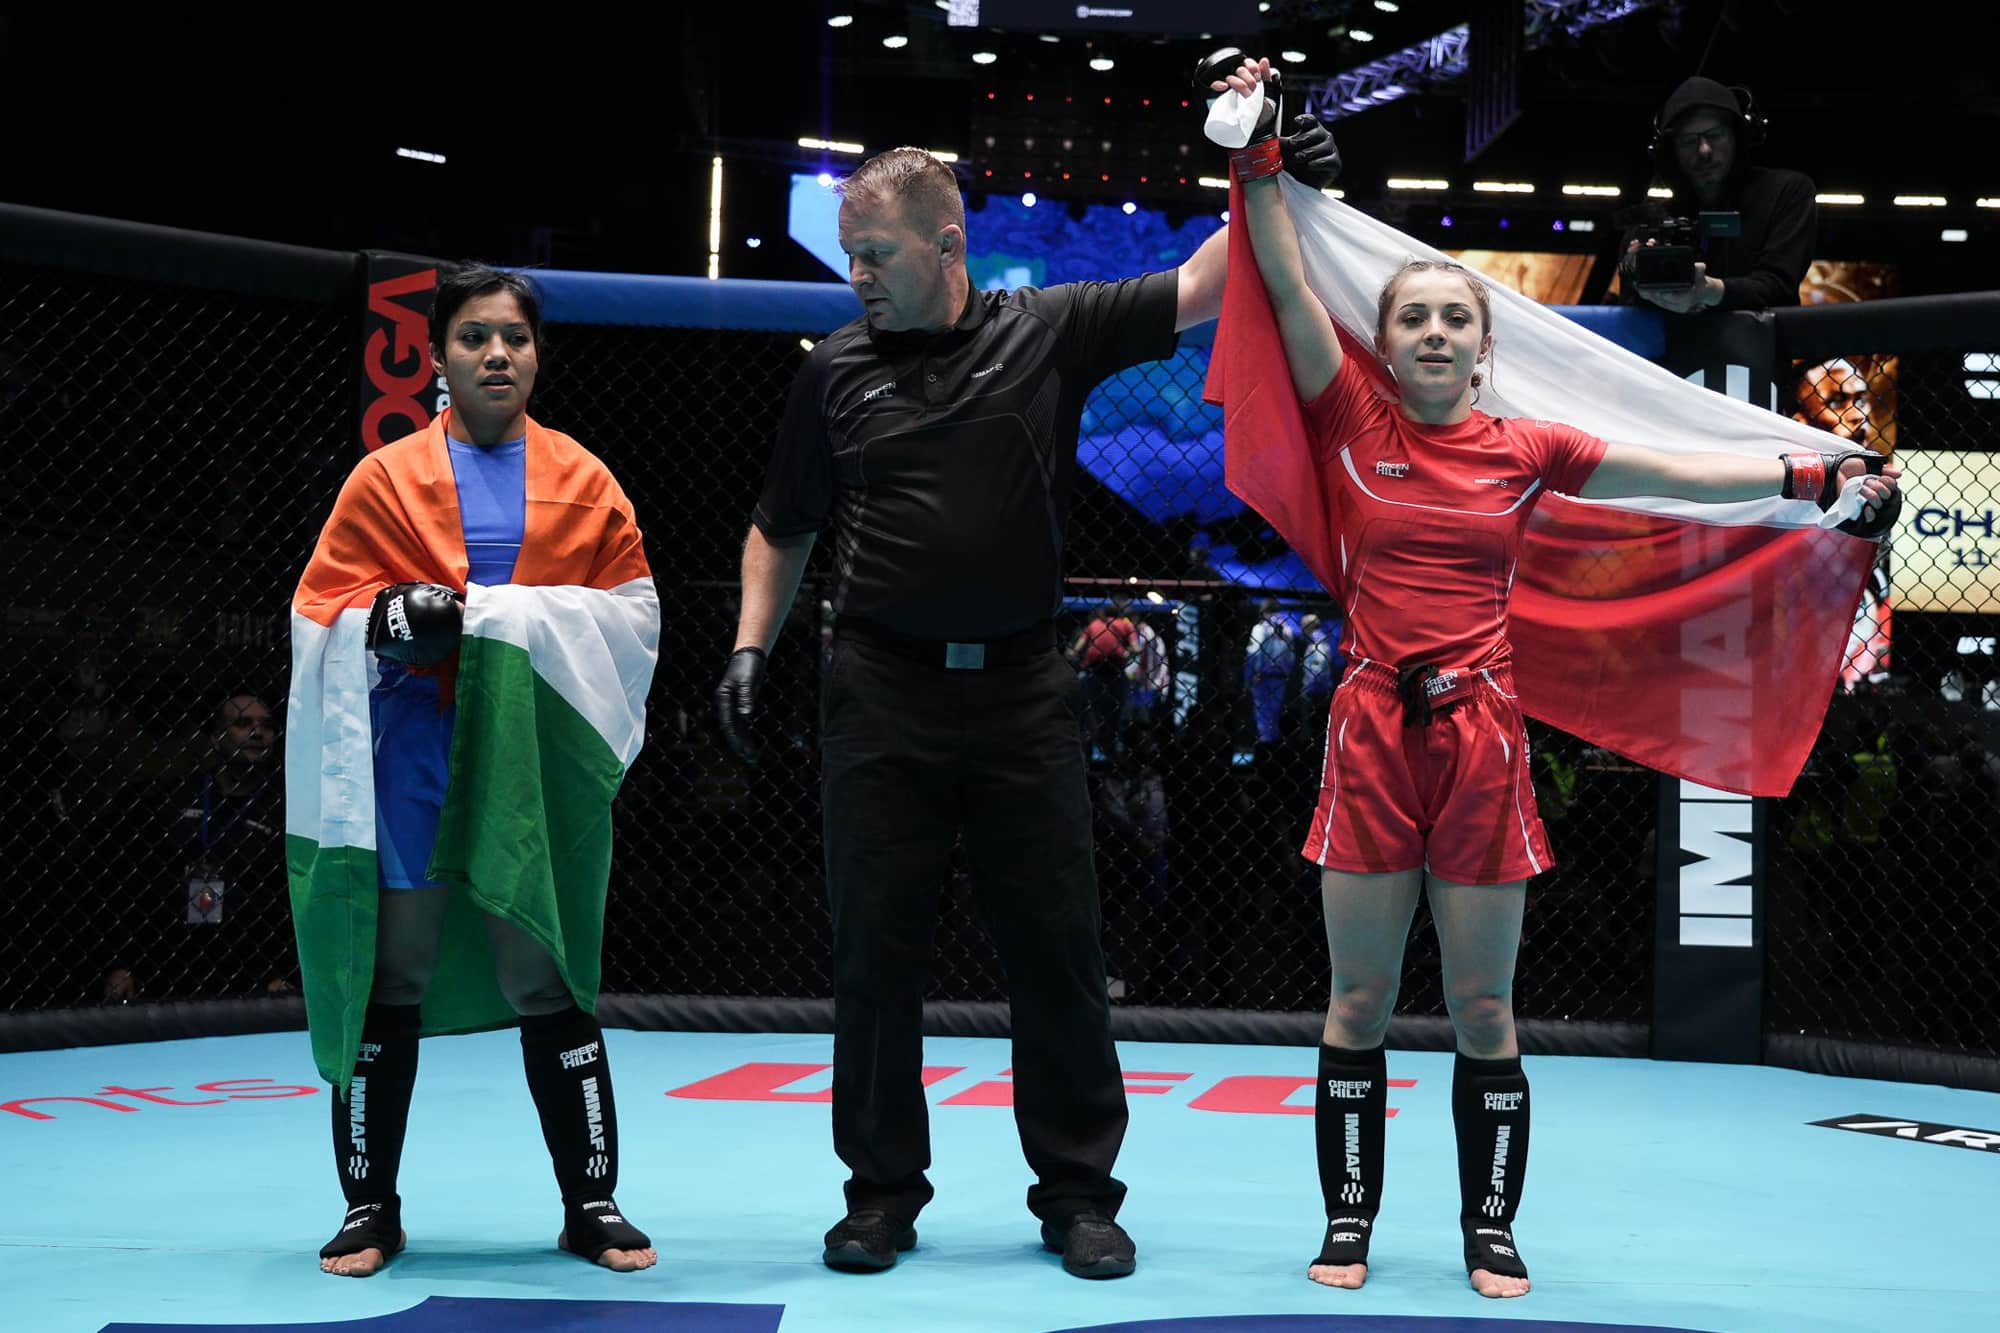 Day 3 sees introduction of Atomweight division while Light Heavyweight division heats up